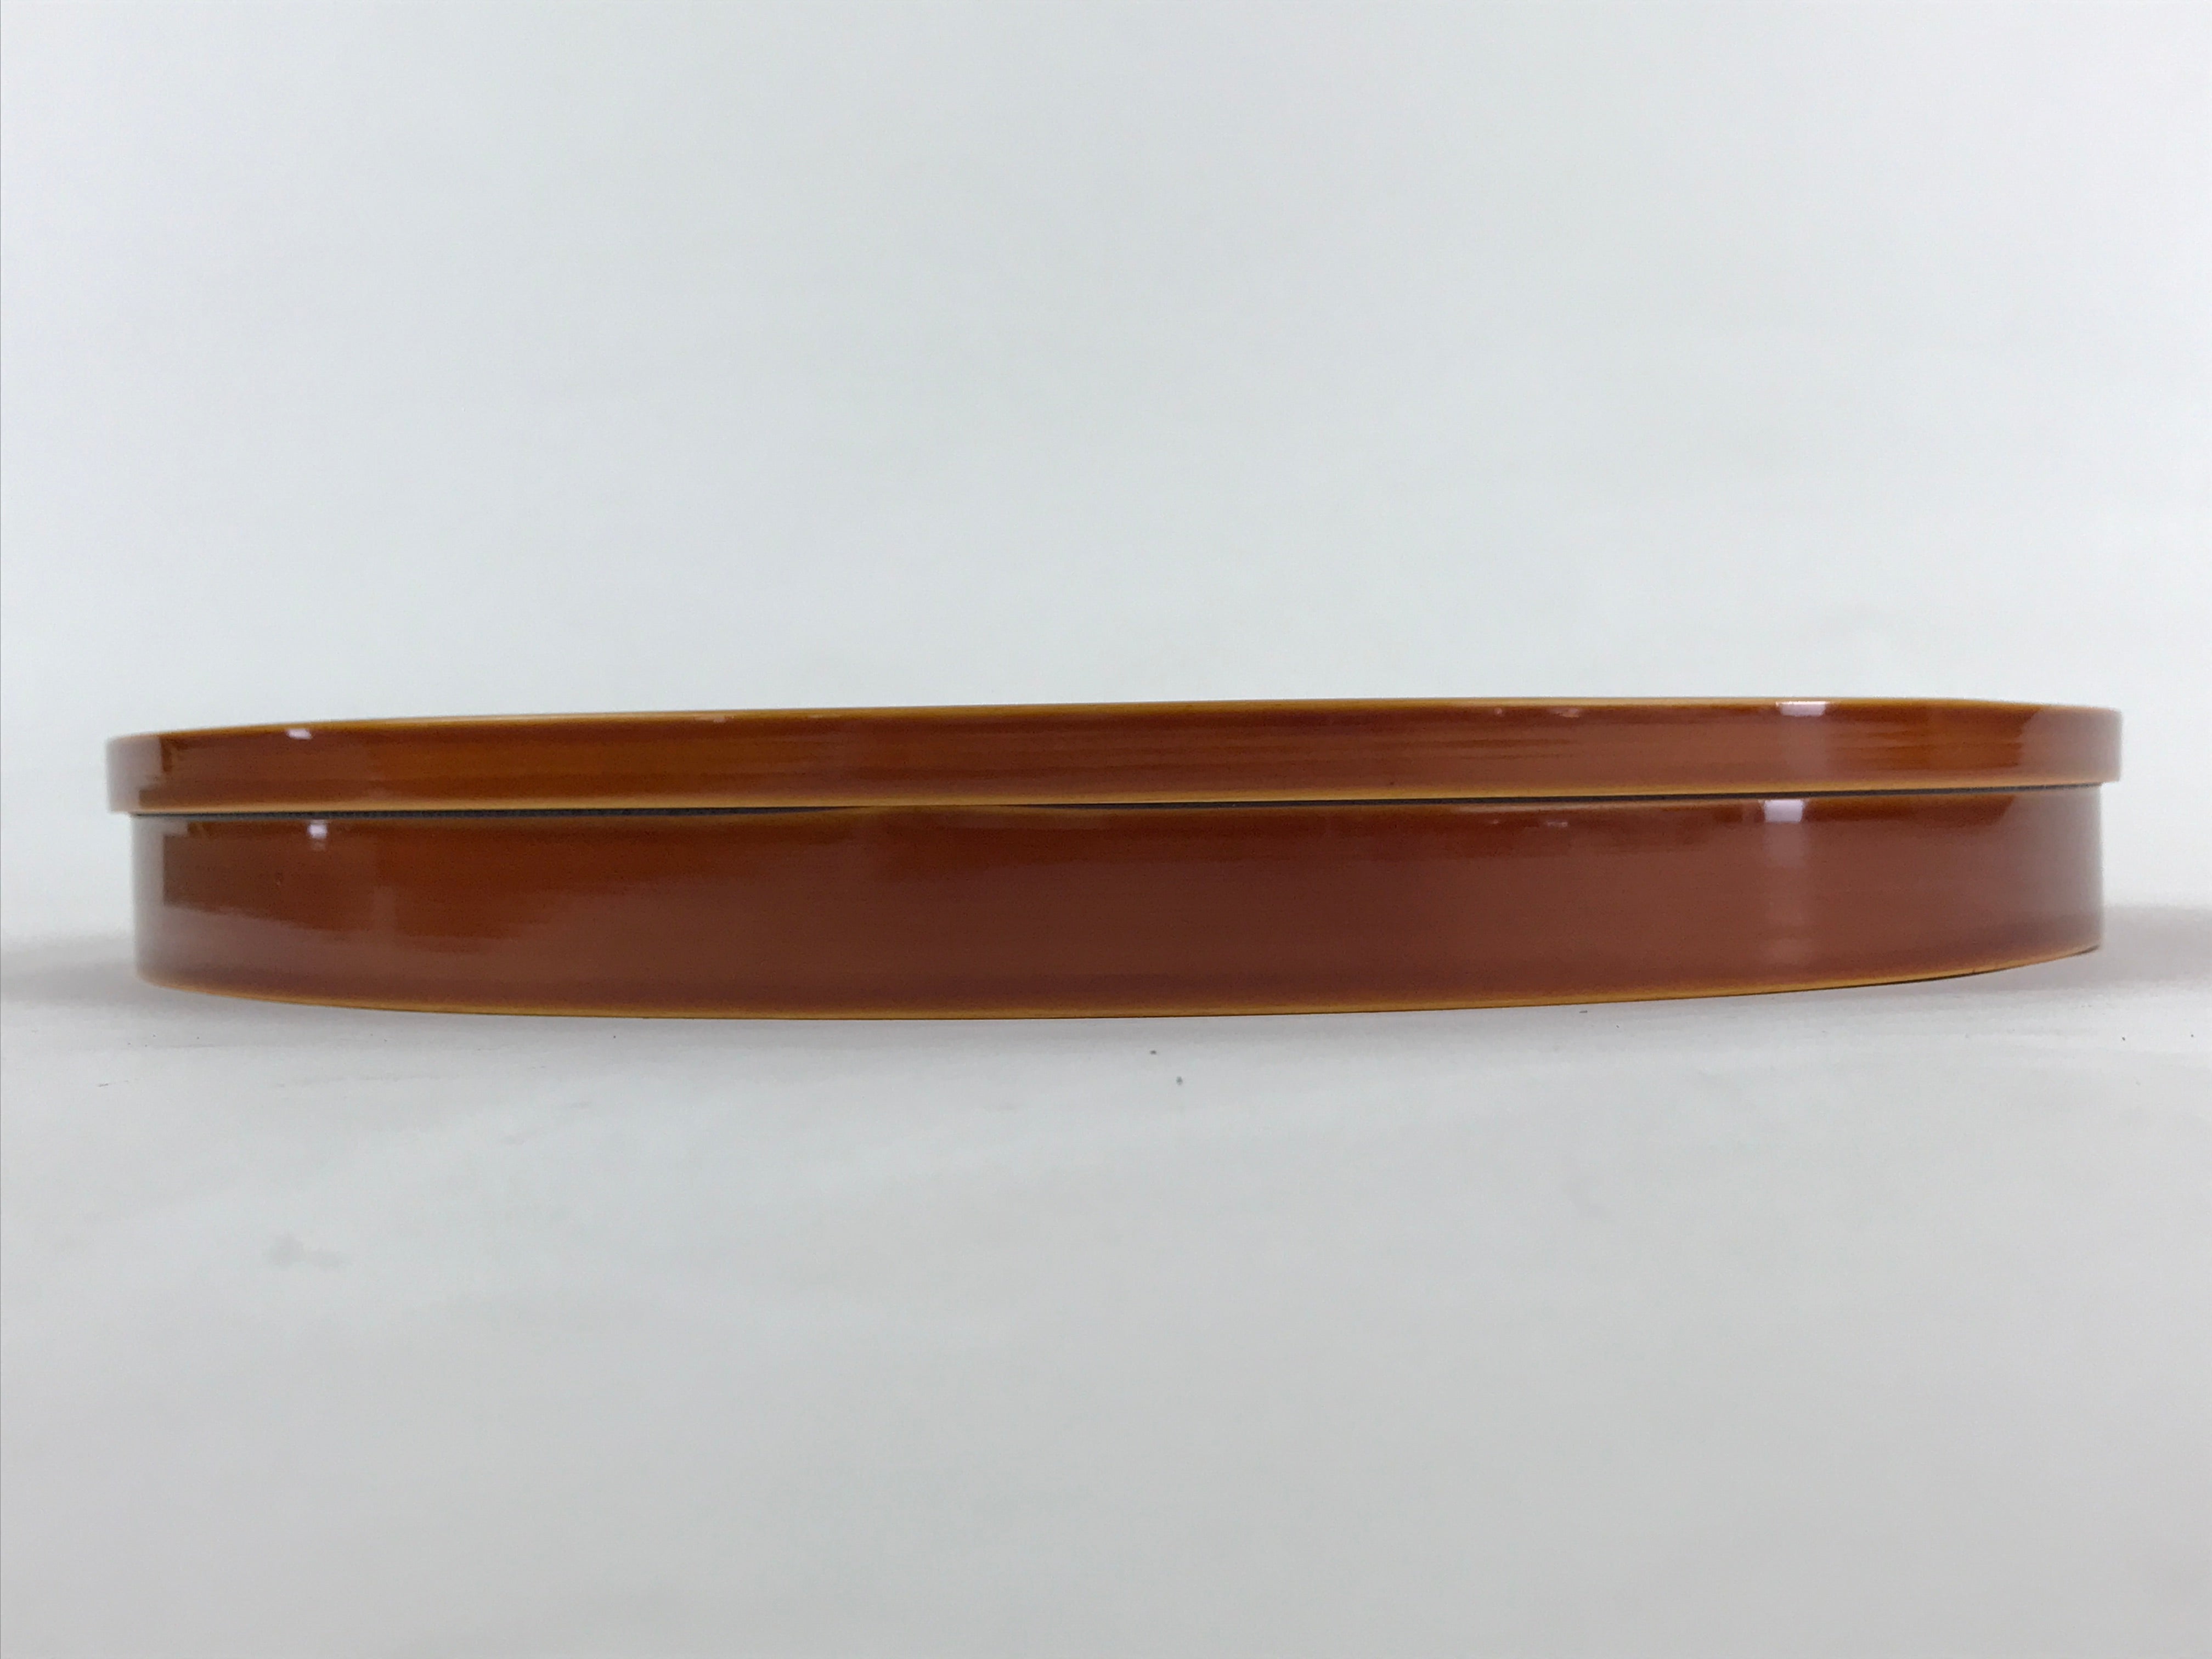 Japanese Lacquered Wooden Serving Tray Vtg Obon Hida Shunkei Brown Round UR901